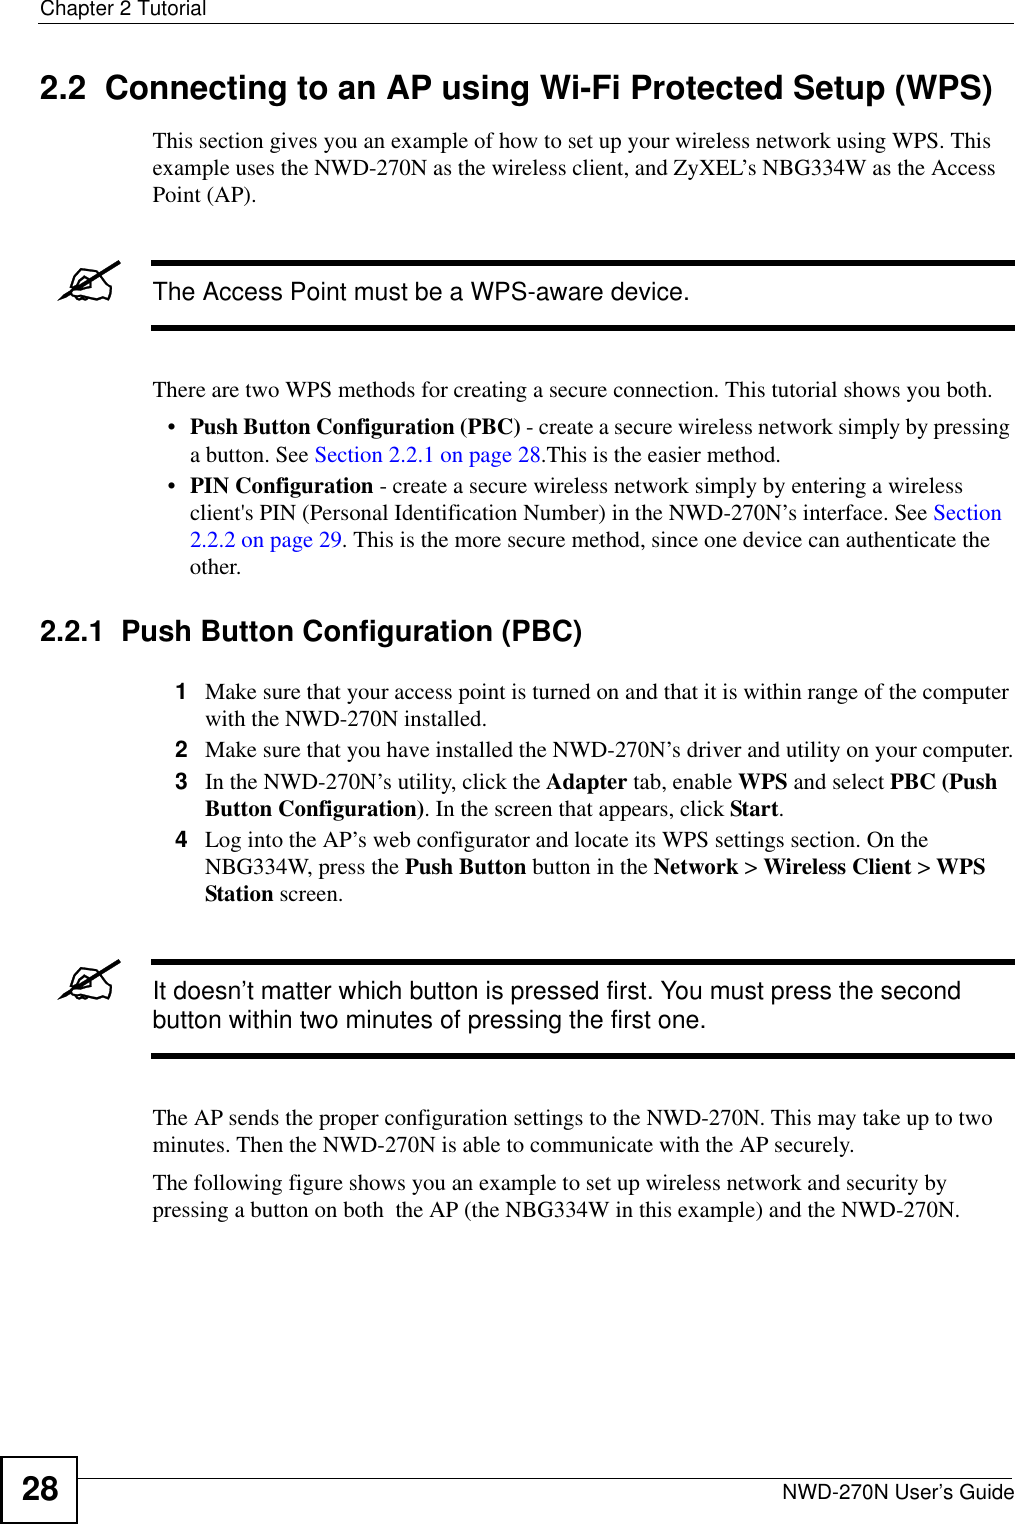 Chapter 2 TutorialNWD-270N User’s Guide282.2  Connecting to an AP using Wi-Fi Protected Setup (WPS)This section gives you an example of how to set up your wireless network using WPS. This example uses the NWD-270N as the wireless client, and ZyXEL’s NBG334W as the Access Point (AP). &quot;The Access Point must be a WPS-aware device.There are two WPS methods for creating a secure connection. This tutorial shows you both.•Push Button Configuration (PBC) - create a secure wireless network simply by pressing a button. See Section 2.2.1 on page 28.This is the easier method.•PIN Configuration - create a secure wireless network simply by entering a wireless client&apos;s PIN (Personal Identification Number) in the NWD-270N’s interface. See Section 2.2.2 on page 29. This is the more secure method, since one device can authenticate the other.2.2.1  Push Button Configuration (PBC)1Make sure that your access point is turned on and that it is within range of the computer with the NWD-270N installed. 2Make sure that you have installed the NWD-270N’s driver and utility on your computer.3In the NWD-270N’s utility, click the Adapter tab, enable WPS and select PBC (Push Button Configuration). In the screen that appears, click Start. 4Log into the AP’s web configurator and locate its WPS settings section. On the NBG334W, press the Push Button button in the Network &gt; Wireless Client &gt; WPS Station screen. &quot;It doesn’t matter which button is pressed first. You must press the second button within two minutes of pressing the first one. The AP sends the proper configuration settings to the NWD-270N. This may take up to two minutes. Then the NWD-270N is able to communicate with the AP securely. The following figure shows you an example to set up wireless network and security by pressing a button on both  the AP (the NBG334W in this example) and the NWD-270N.